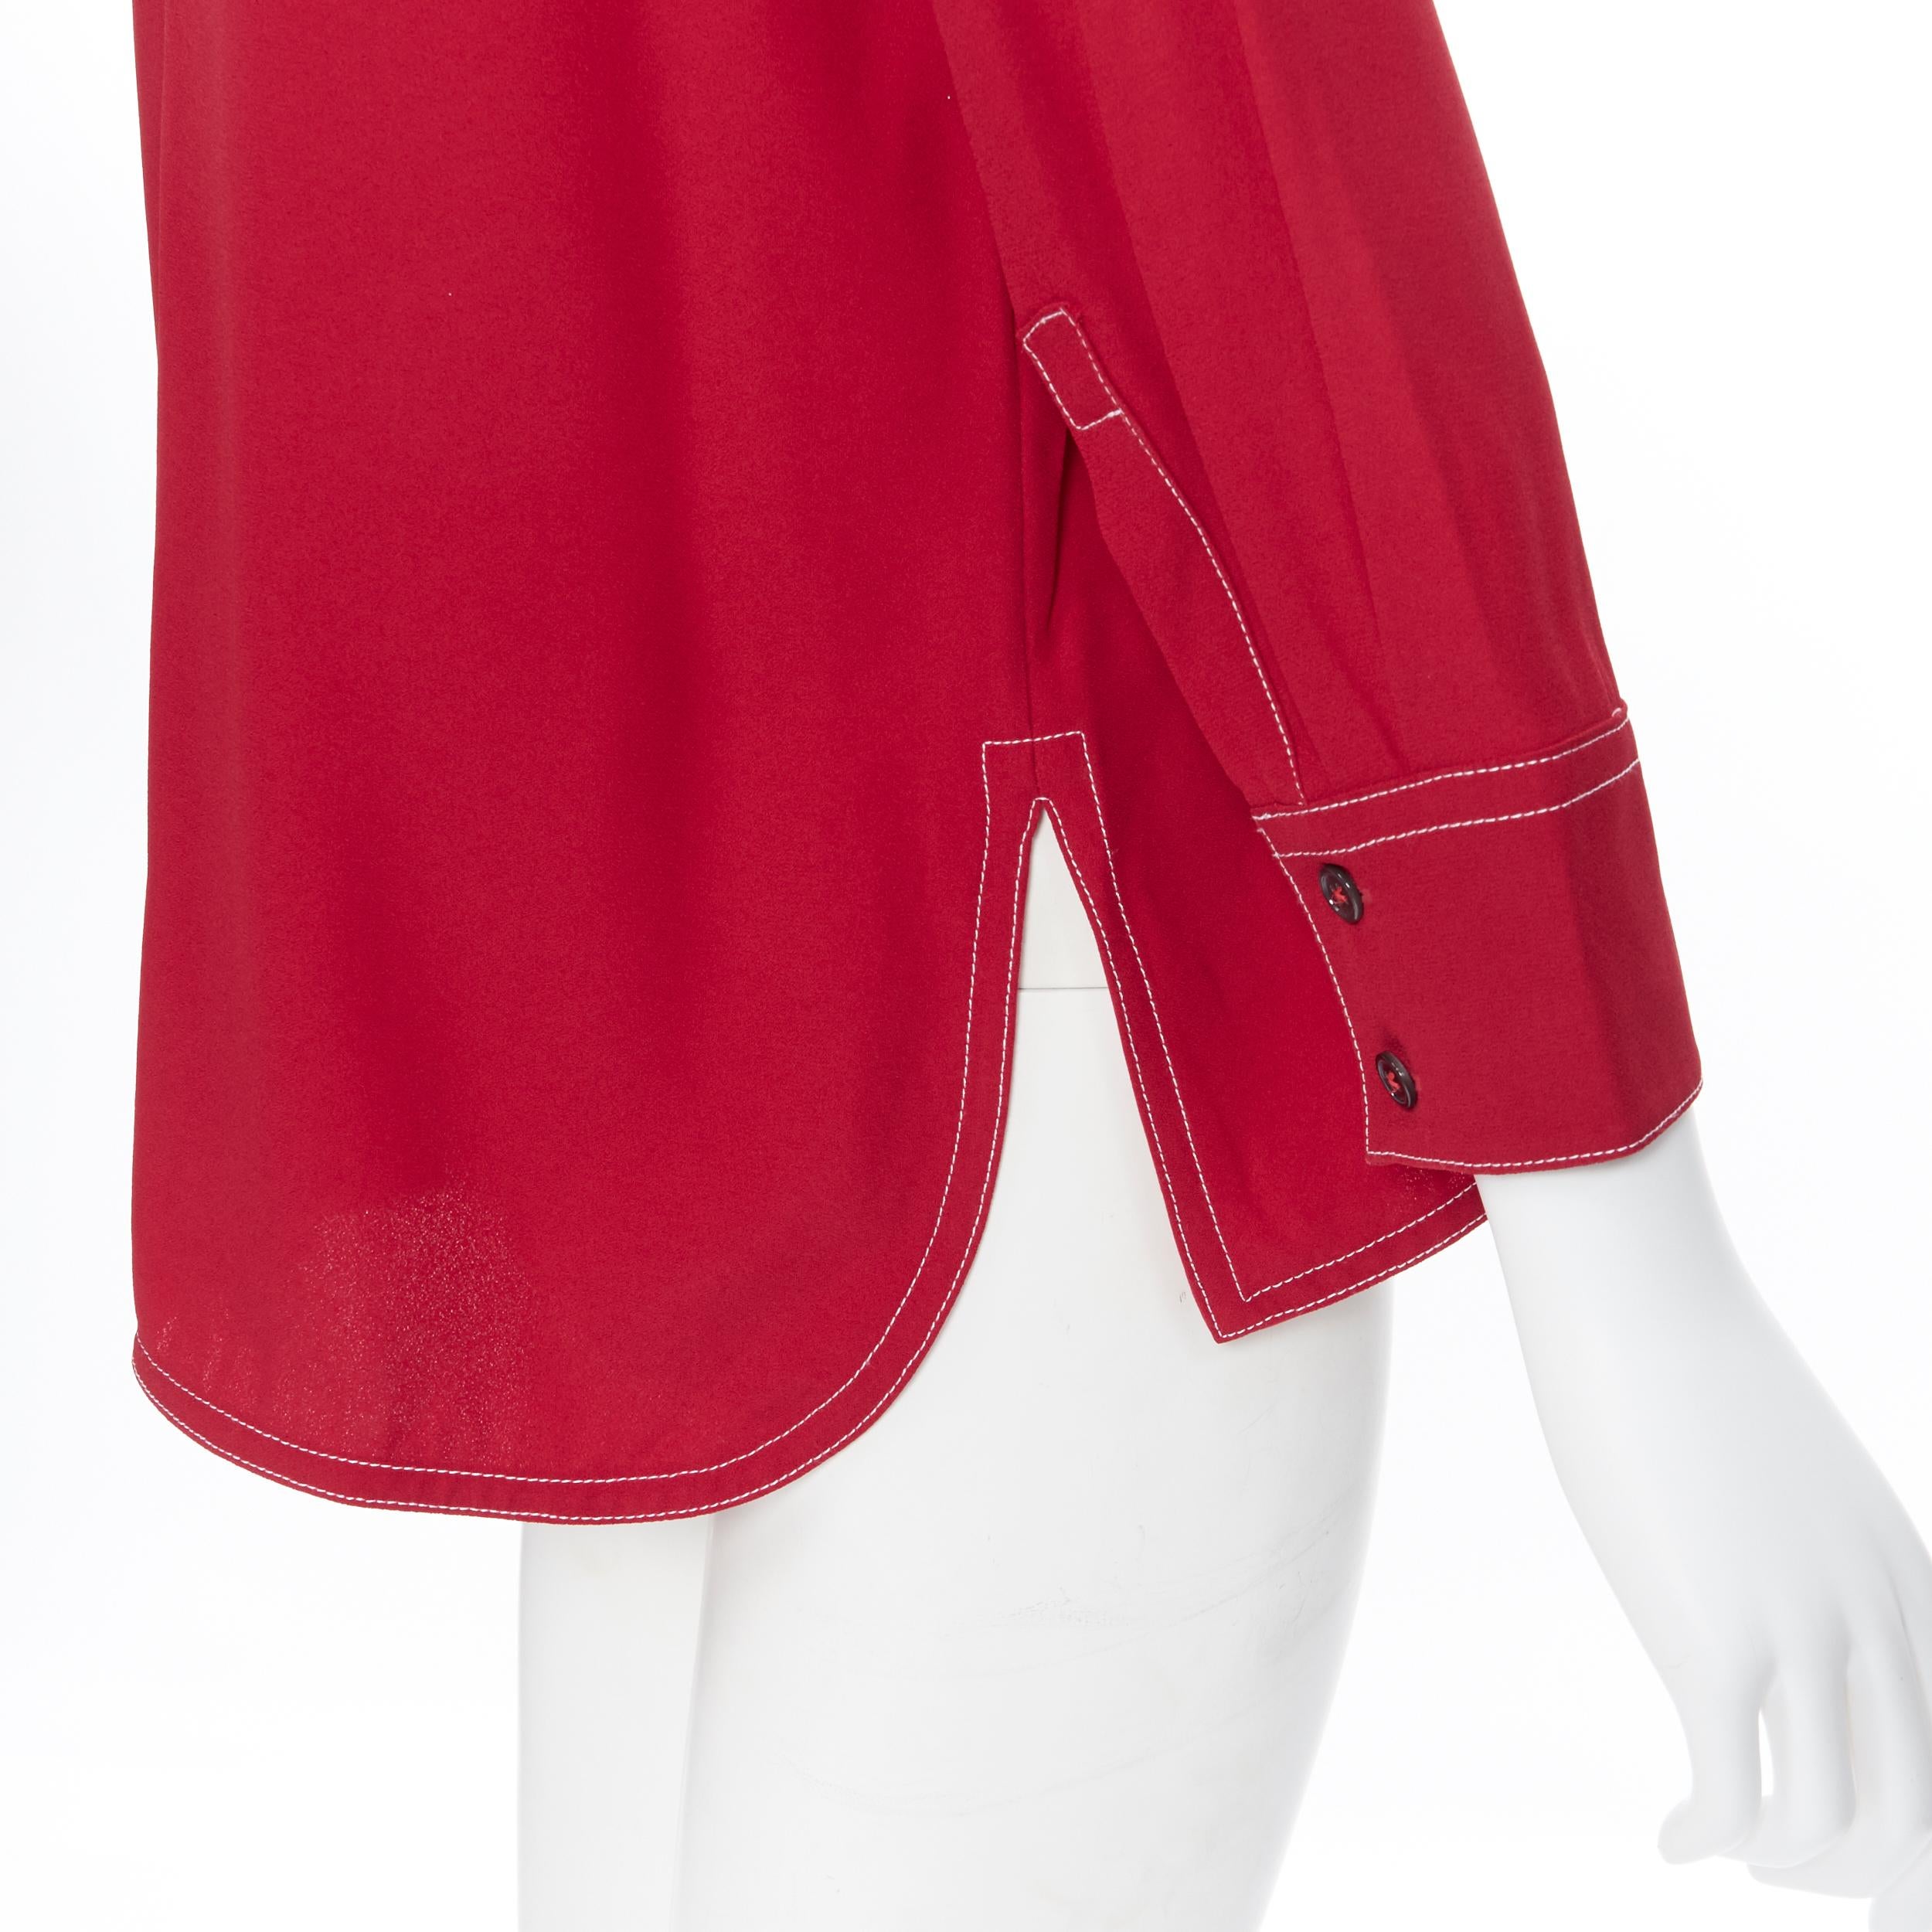 MARNI 2019 viscose acetate red white overstitched V-neck blouse top IT42 M
Brand: Marni
Model Name / Style: Blouse top
Material: Viscose, acetate
Color: Red
Pattern: Solid
Extra Detail: V-neck. Overstitching detail.
Made in: Italy

CONDITION: